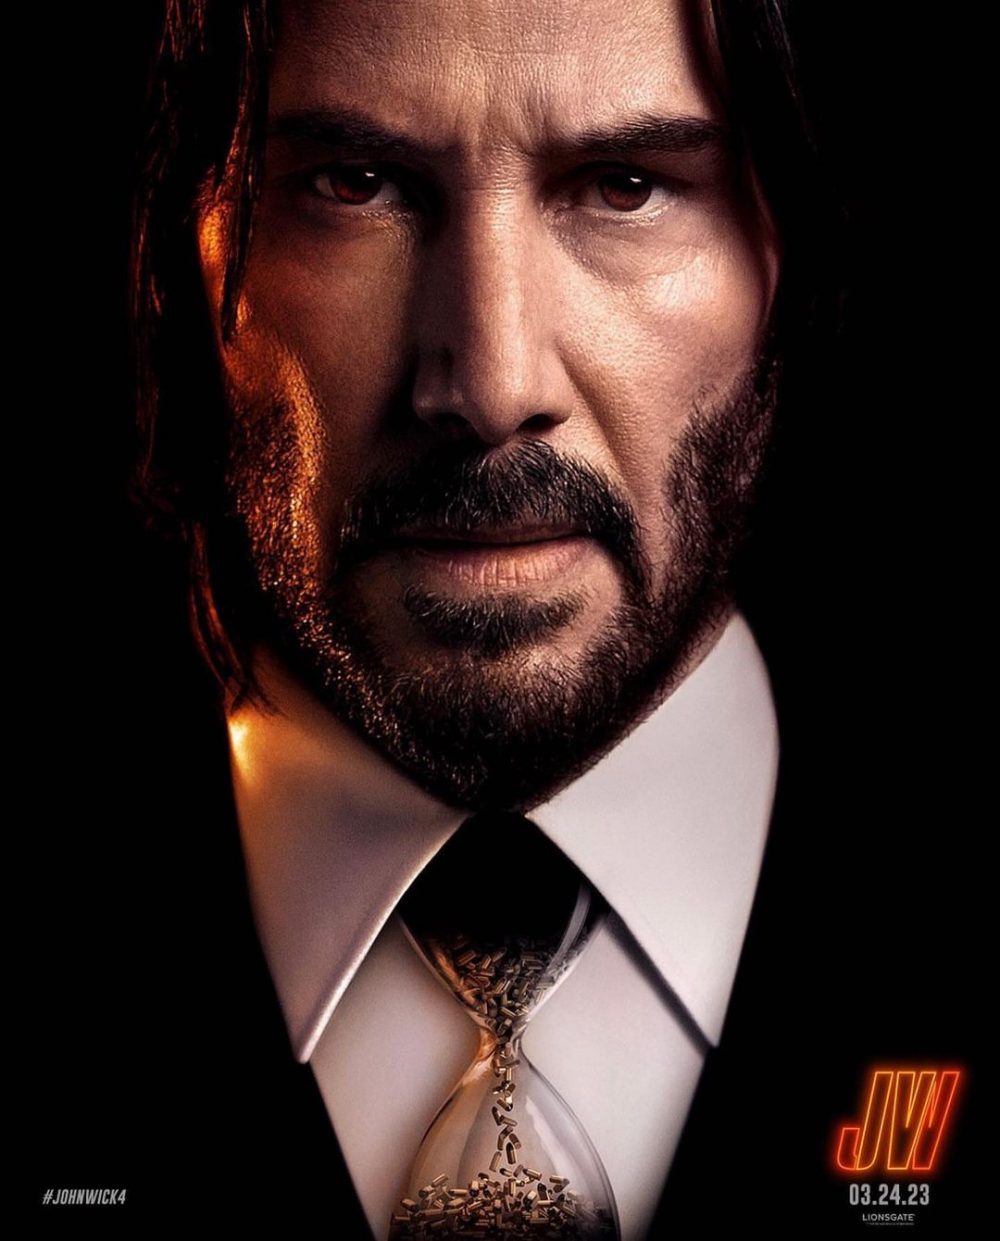 Keanu Reeves' films are highly rated